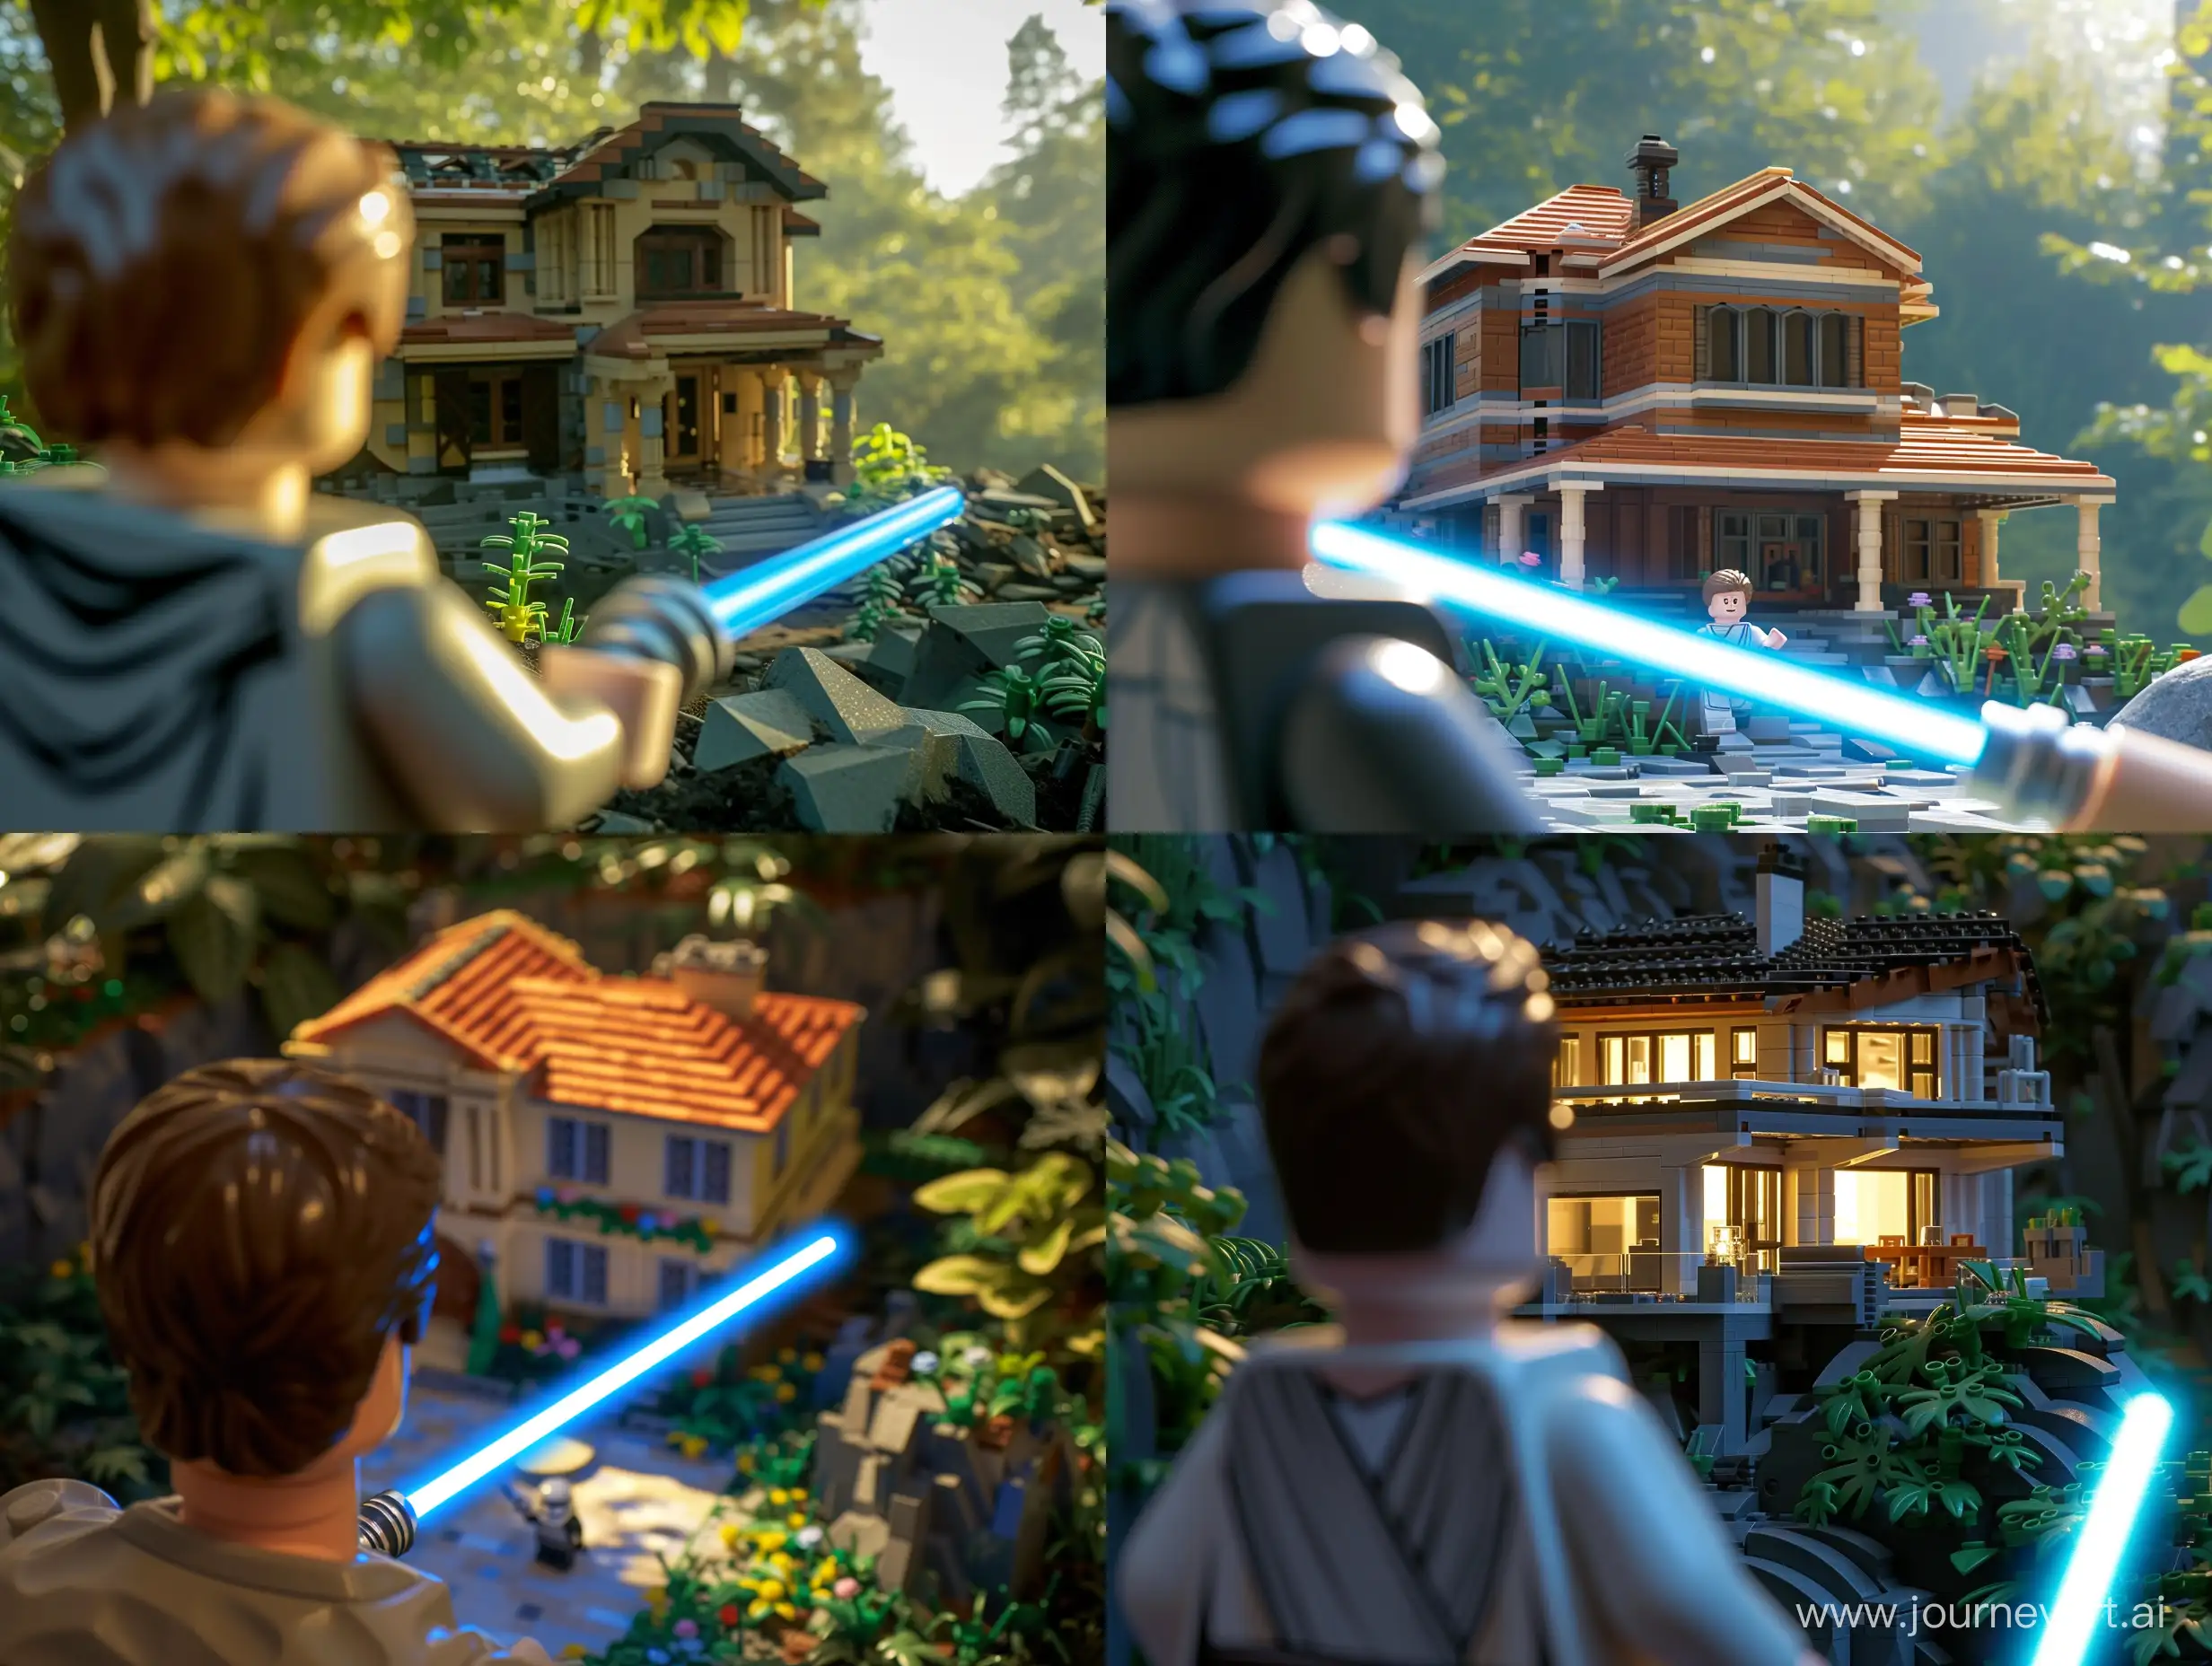 Man-Admiring-Lego-Star-Wars-House-in-Natural-Daylight